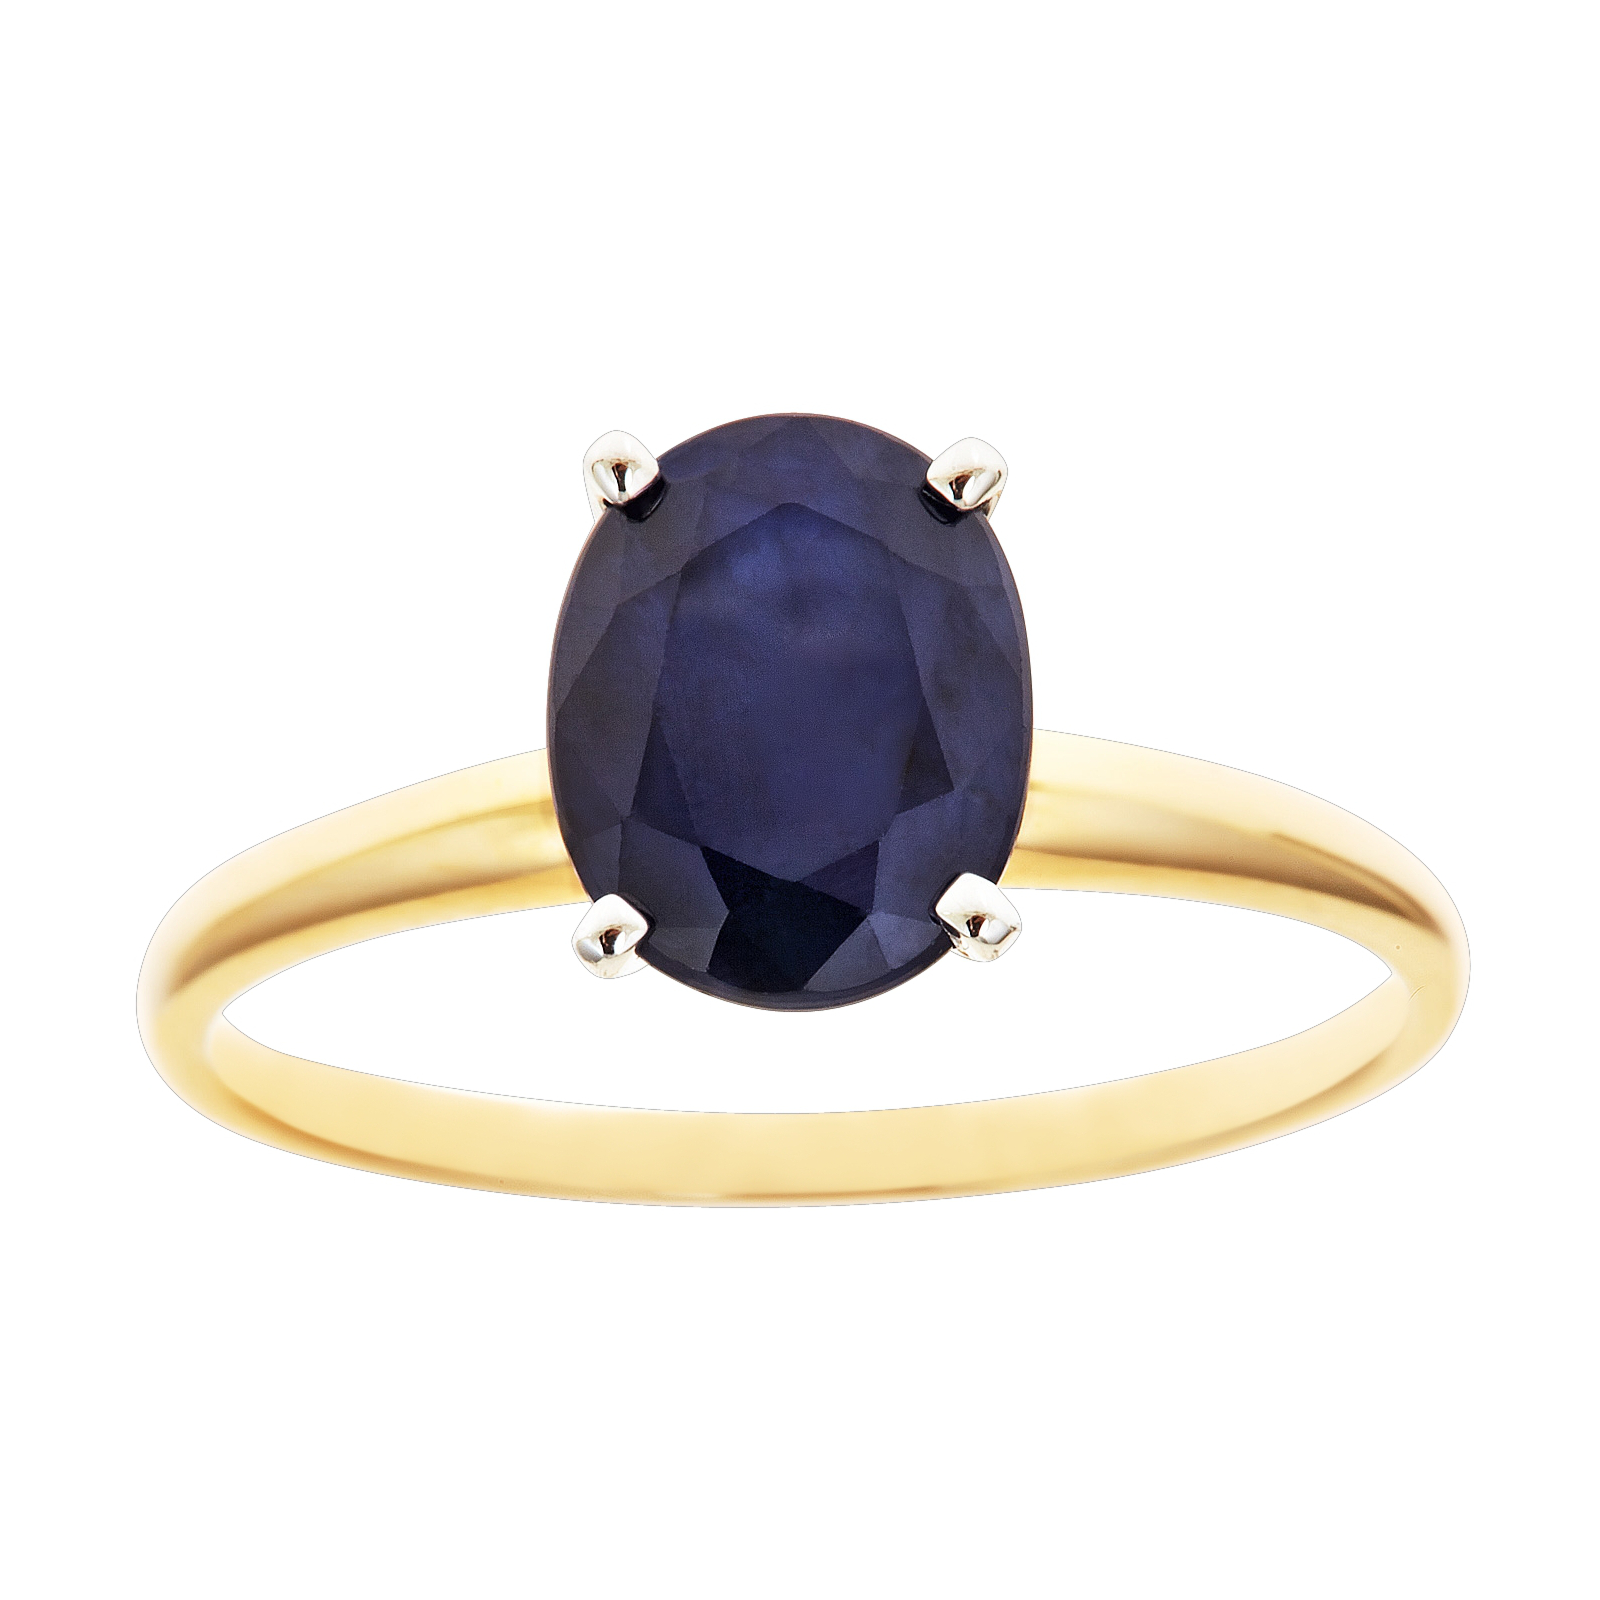 Ladies 14K Two Tone Oval Genuine Sapphire Ring